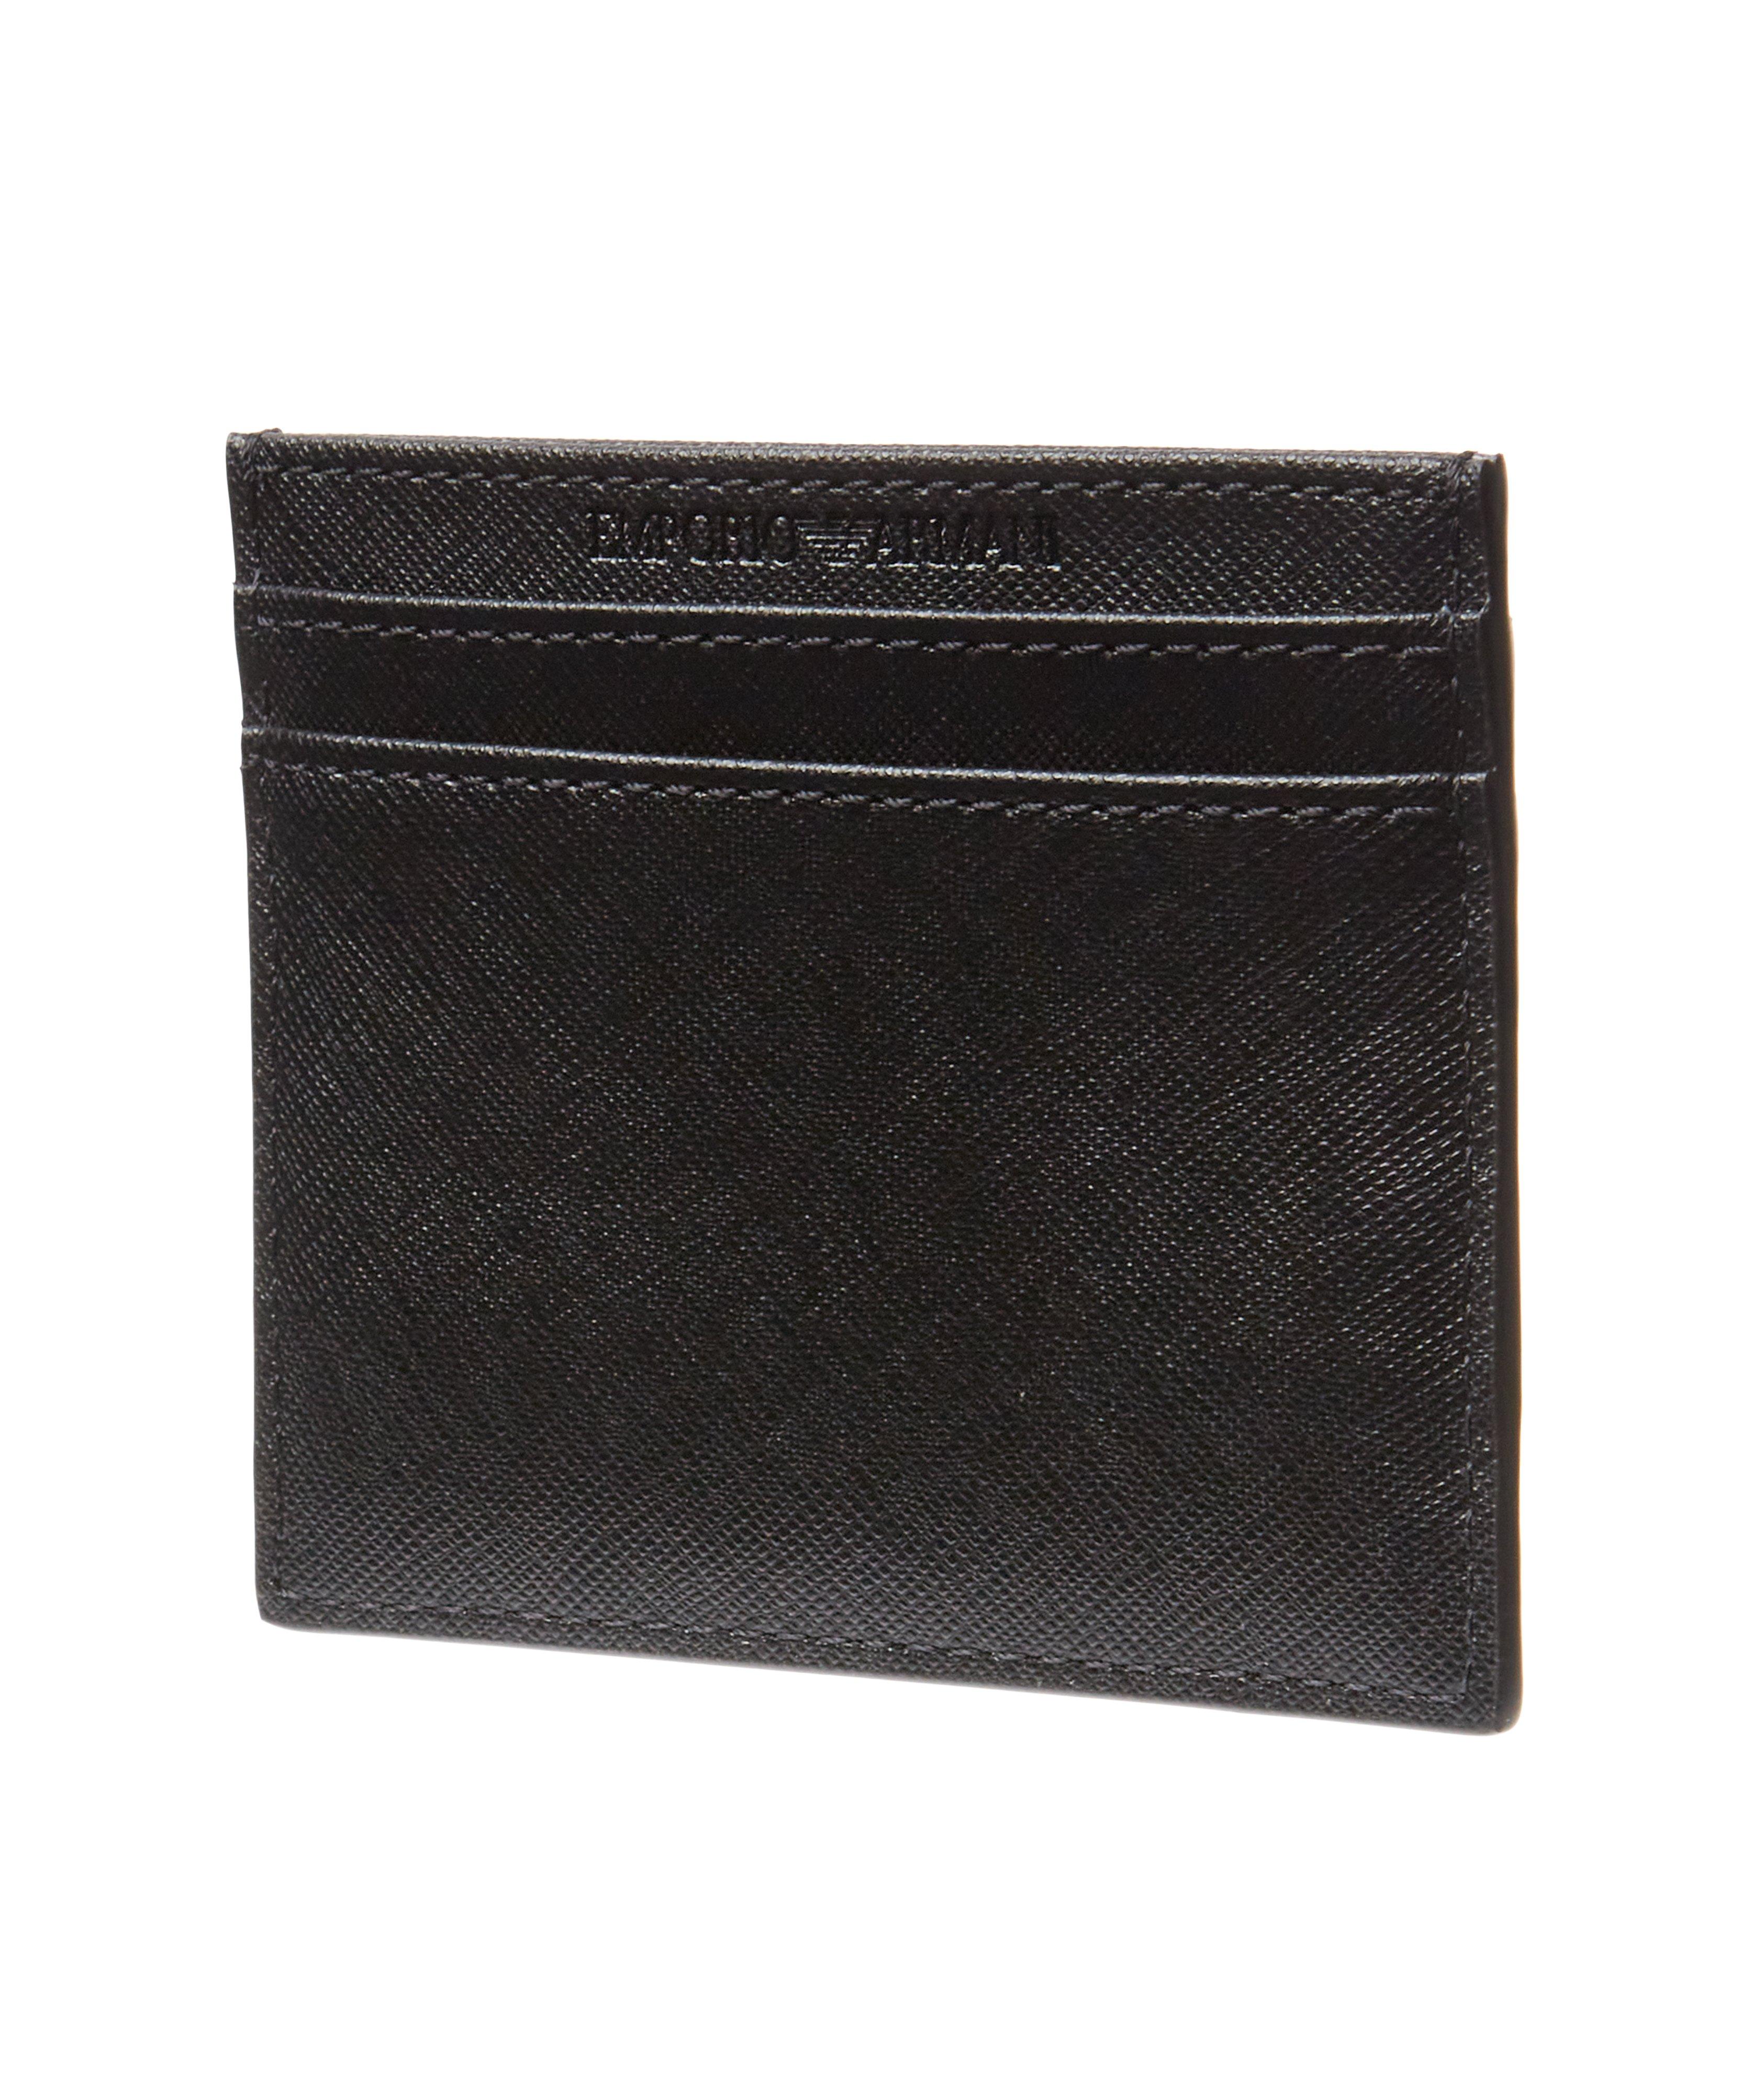 Saffiano Recycled Leather Cardholder image 1